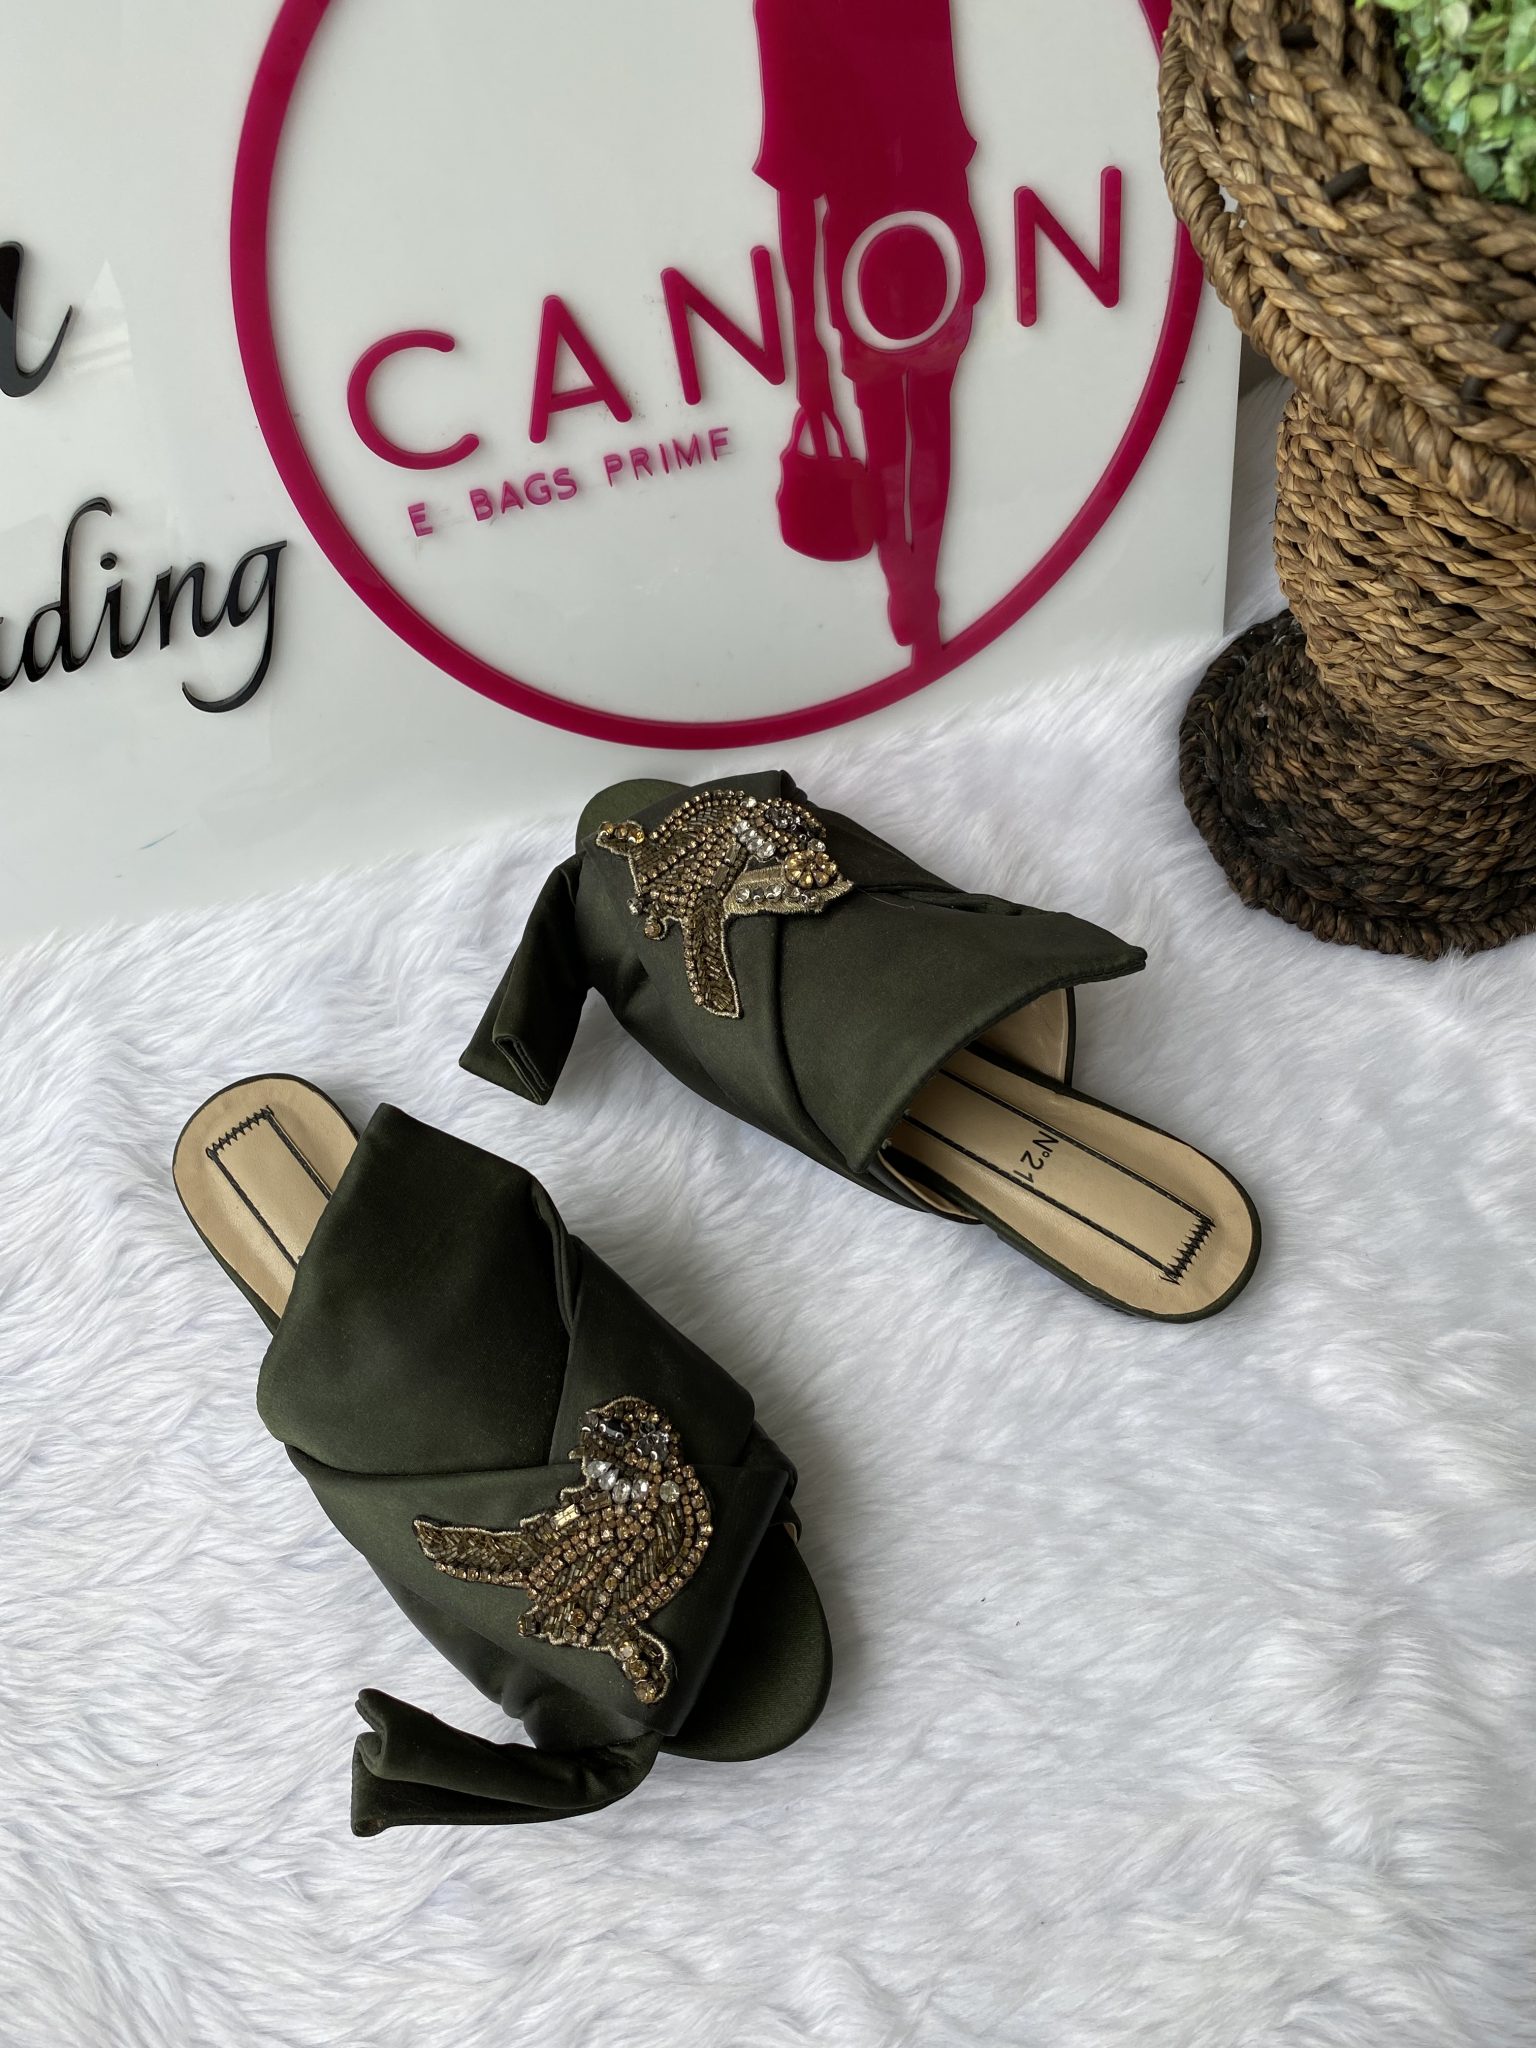 N21 Bow Embellished Slippers Green Size 39. - Canon E-Bags Prime